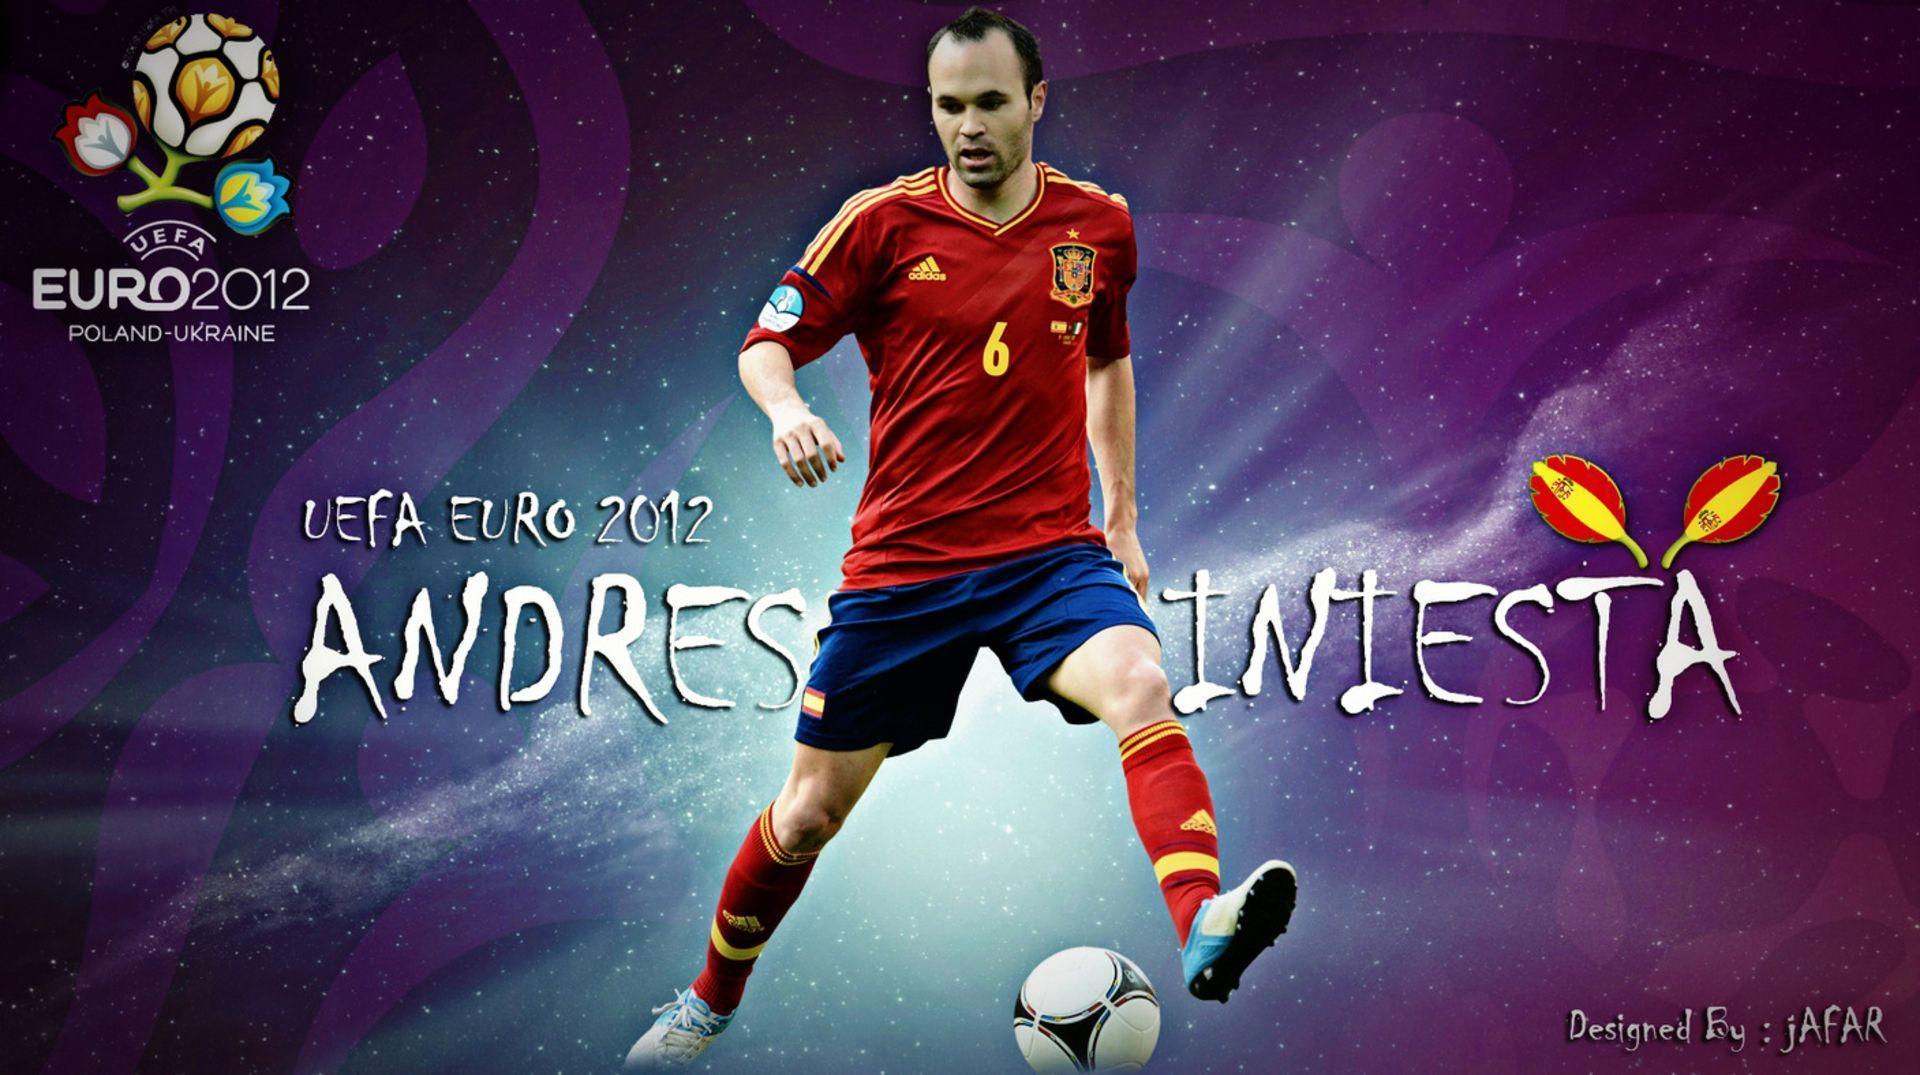 Barcelona Andres Iniesta wallpaper and image